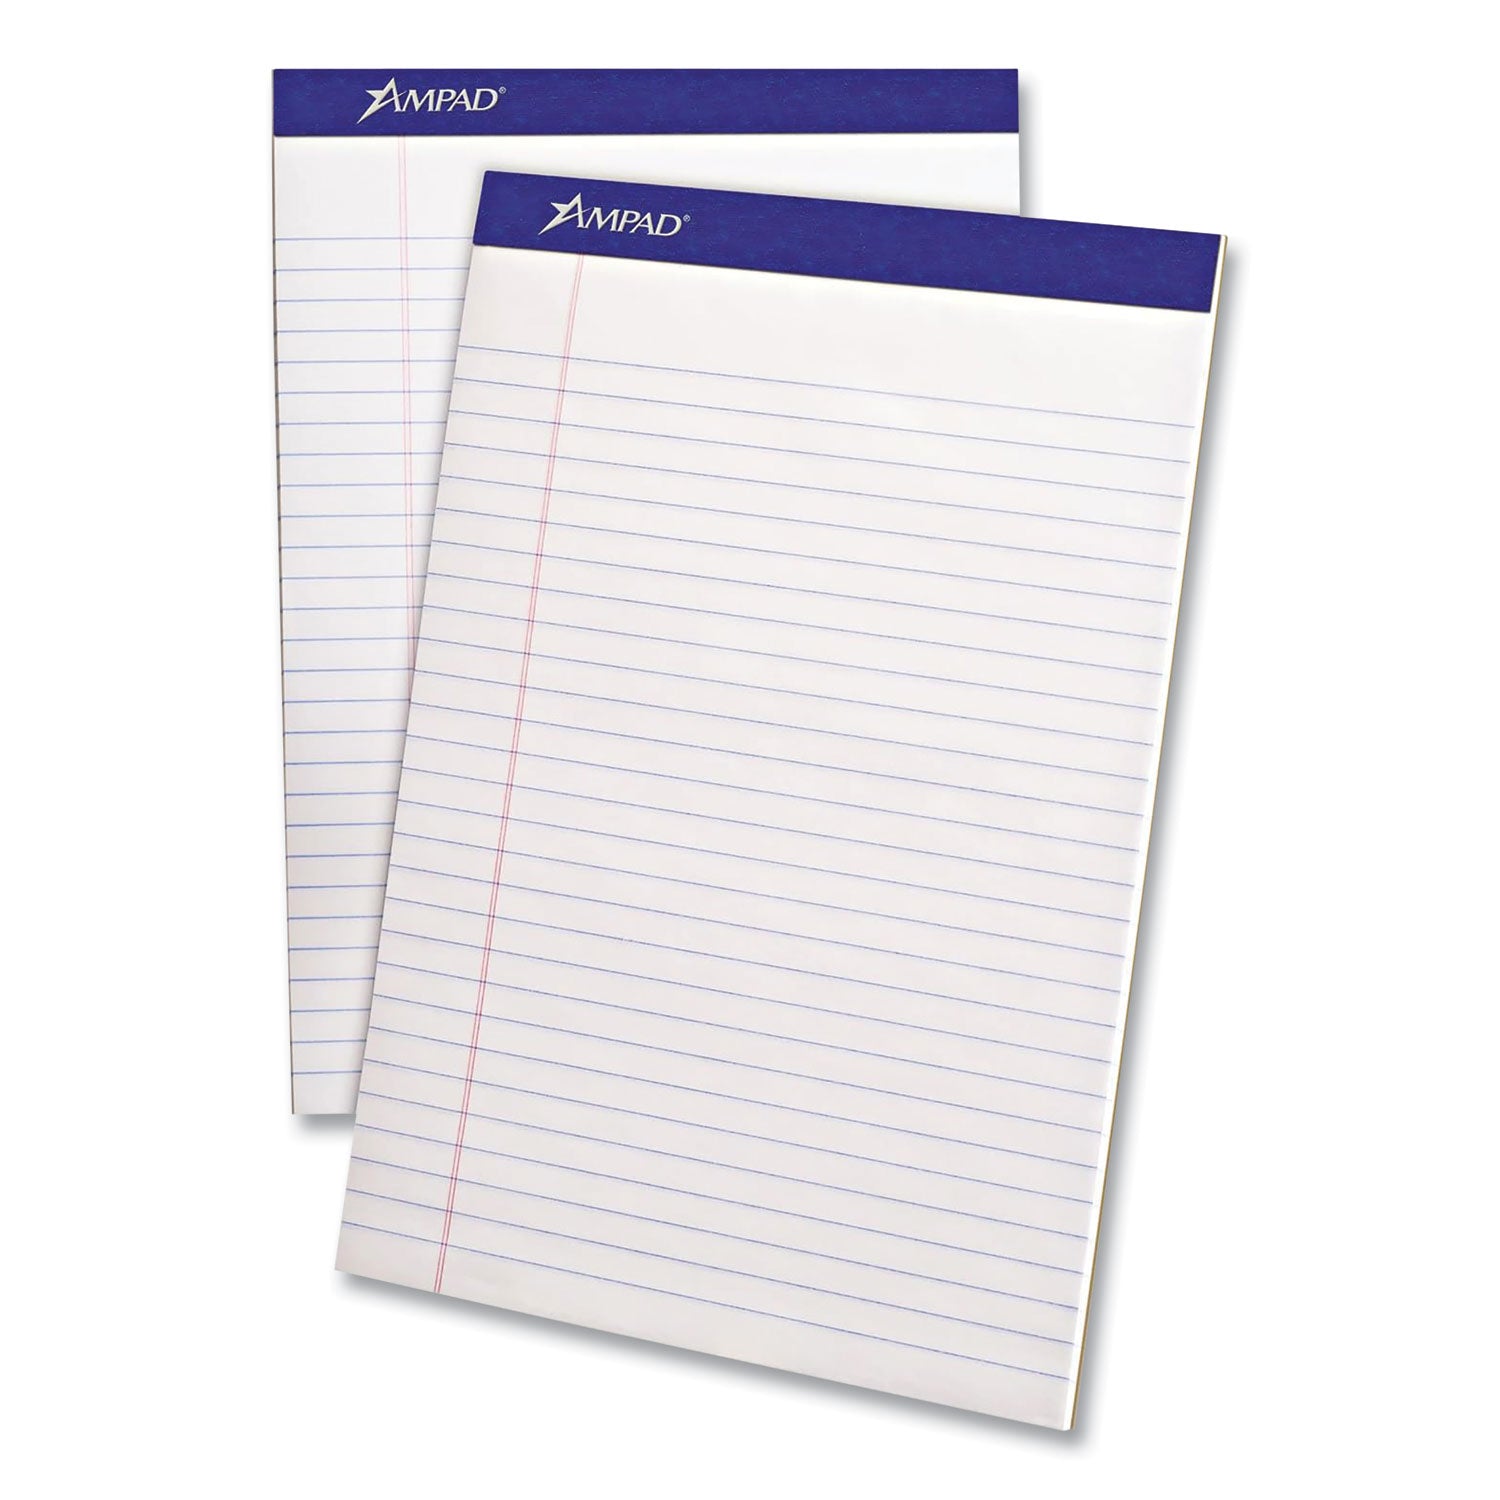 Perforated Writing Pads, Wide/Legal Rule, 50 White 8.5 x 11.75 Sheets, Dozen - 